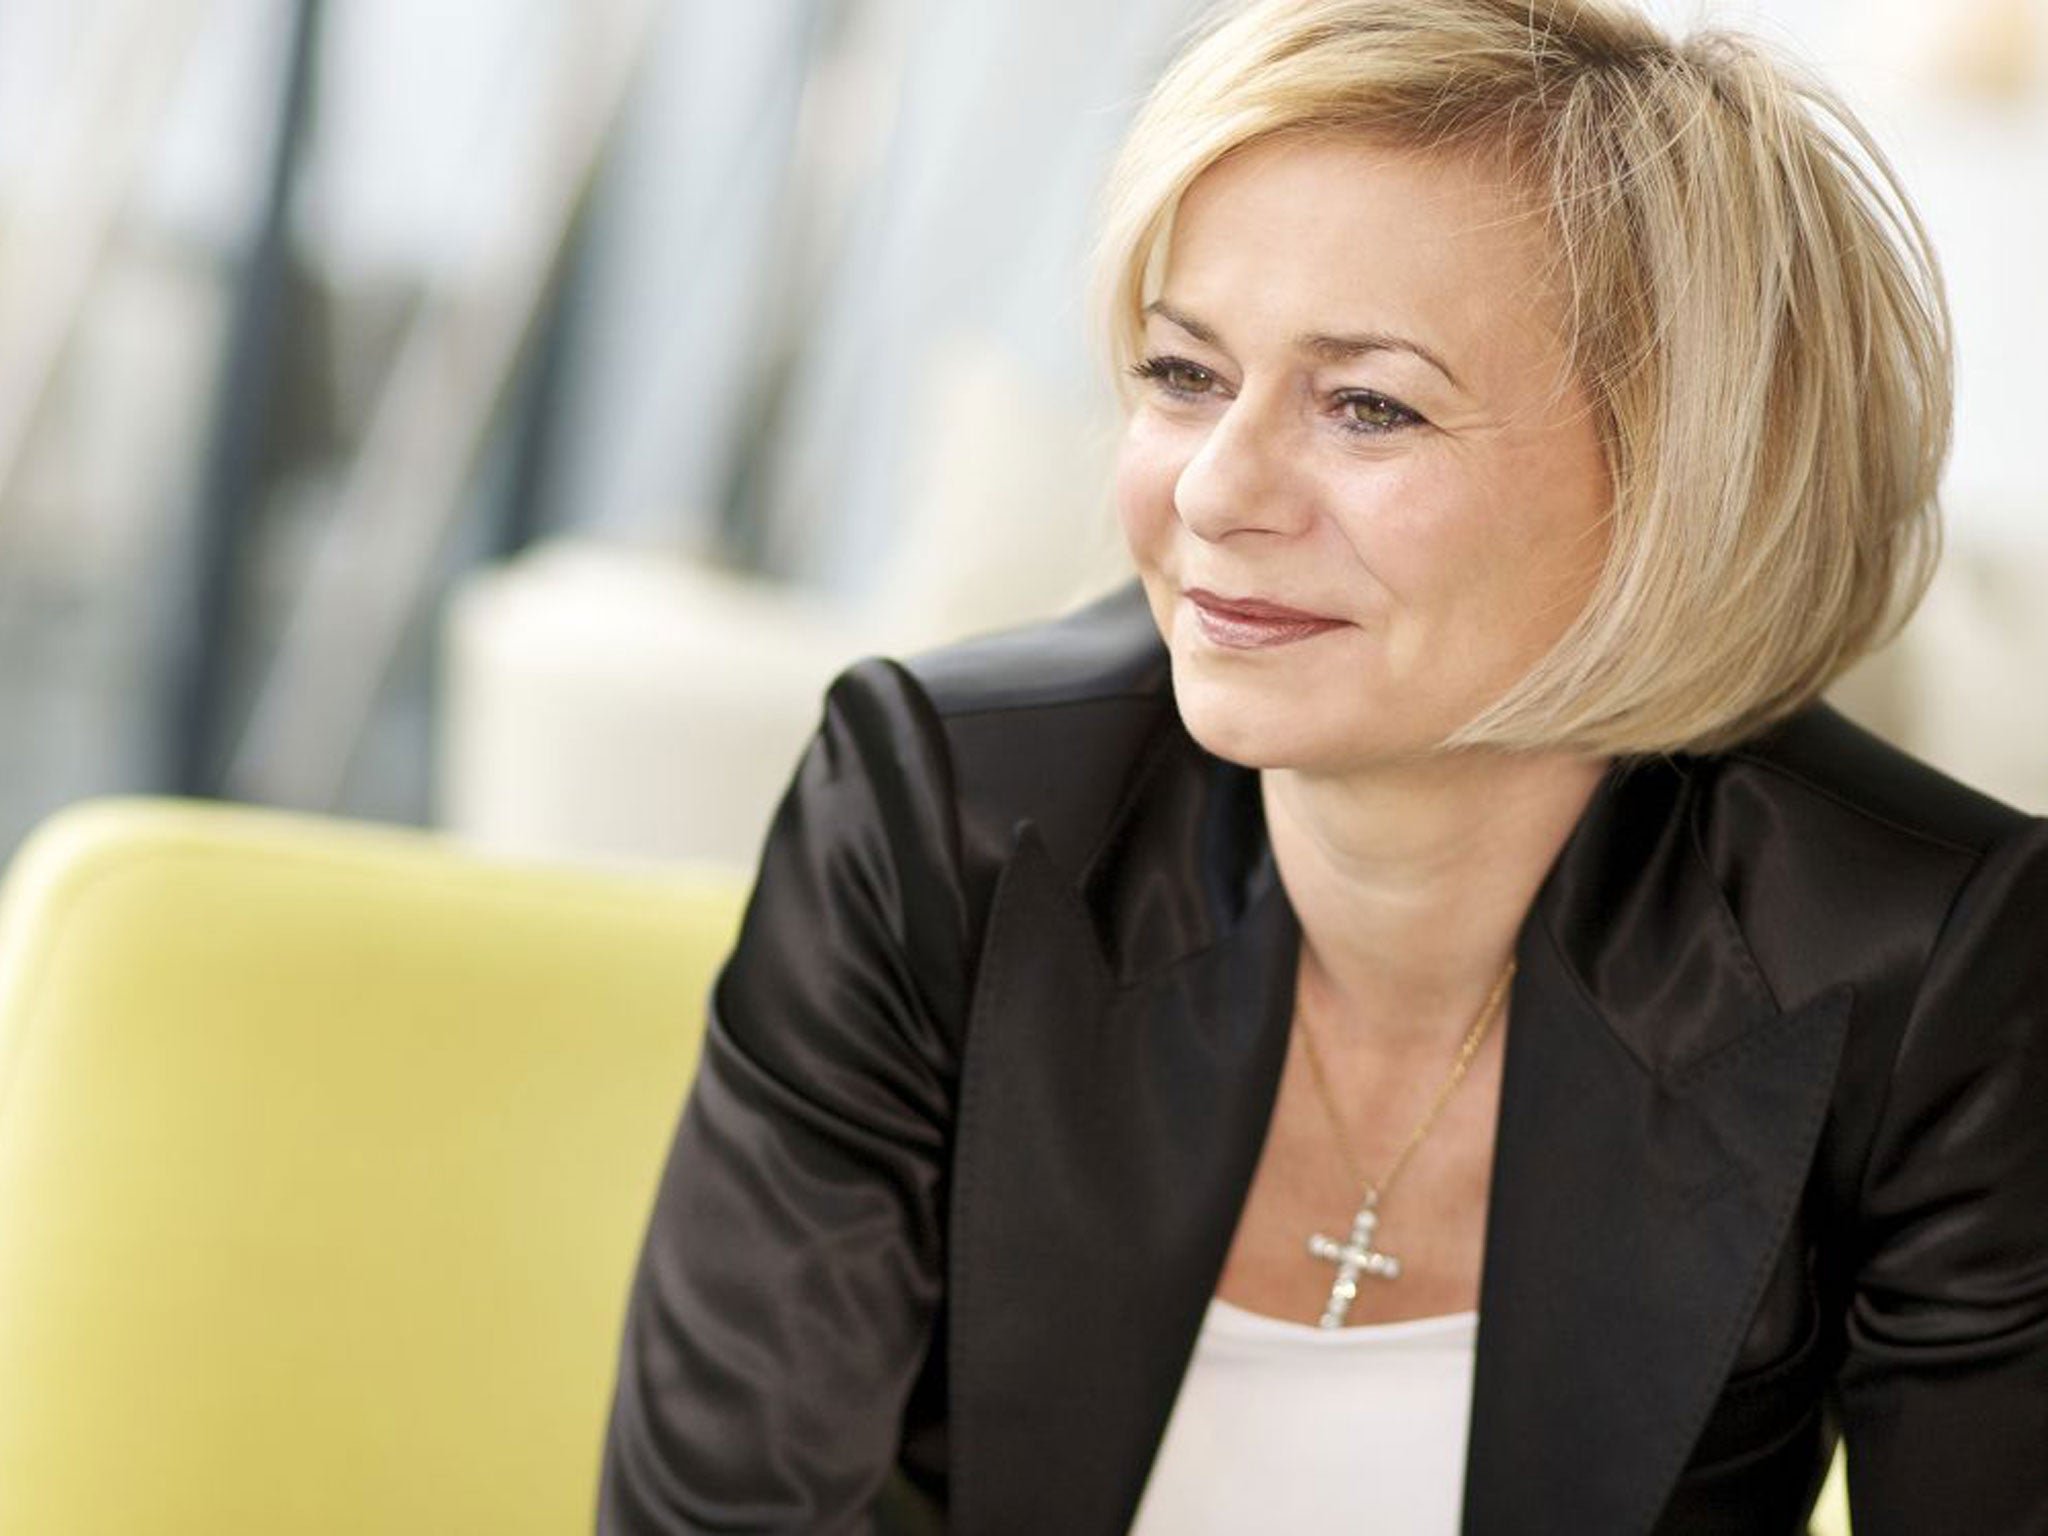 Thomas Cook’s chief executive Harriet Green